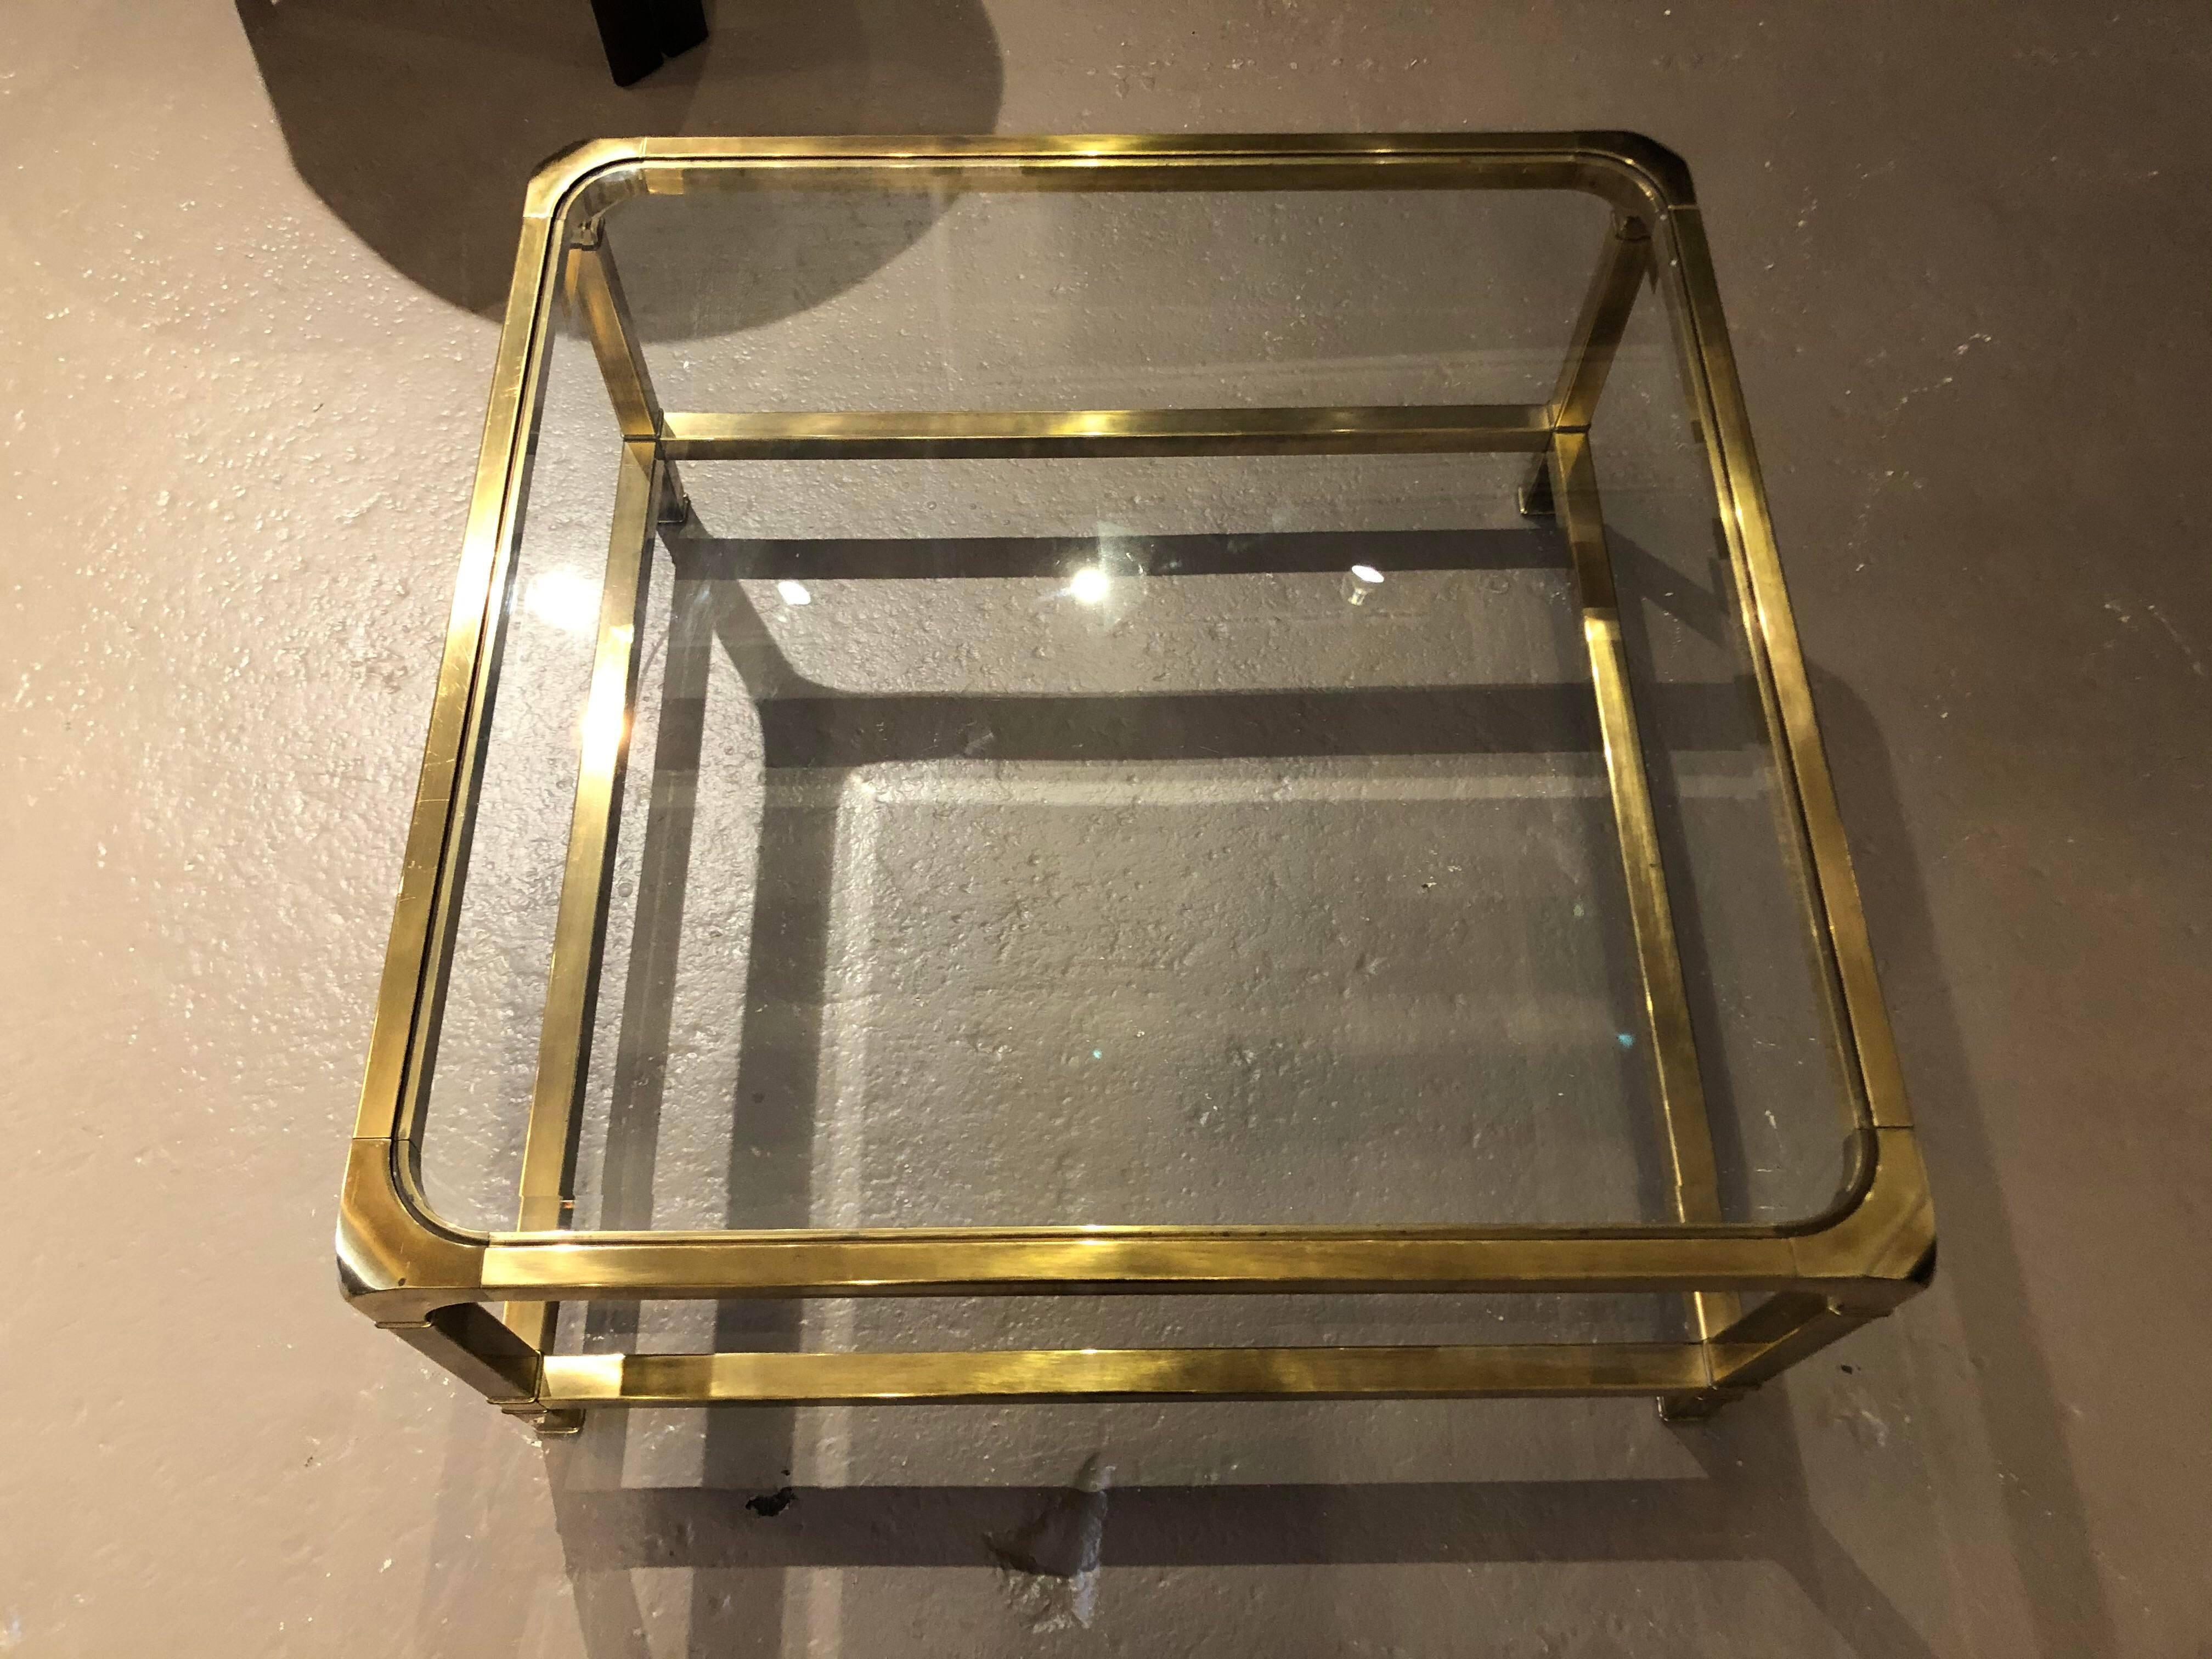 Gorgeous and great condition brass and glass coffee table! I loved the rounded edge (child friendly) and still so chic. I actually have this table in my own living room.

Dimensions: 34